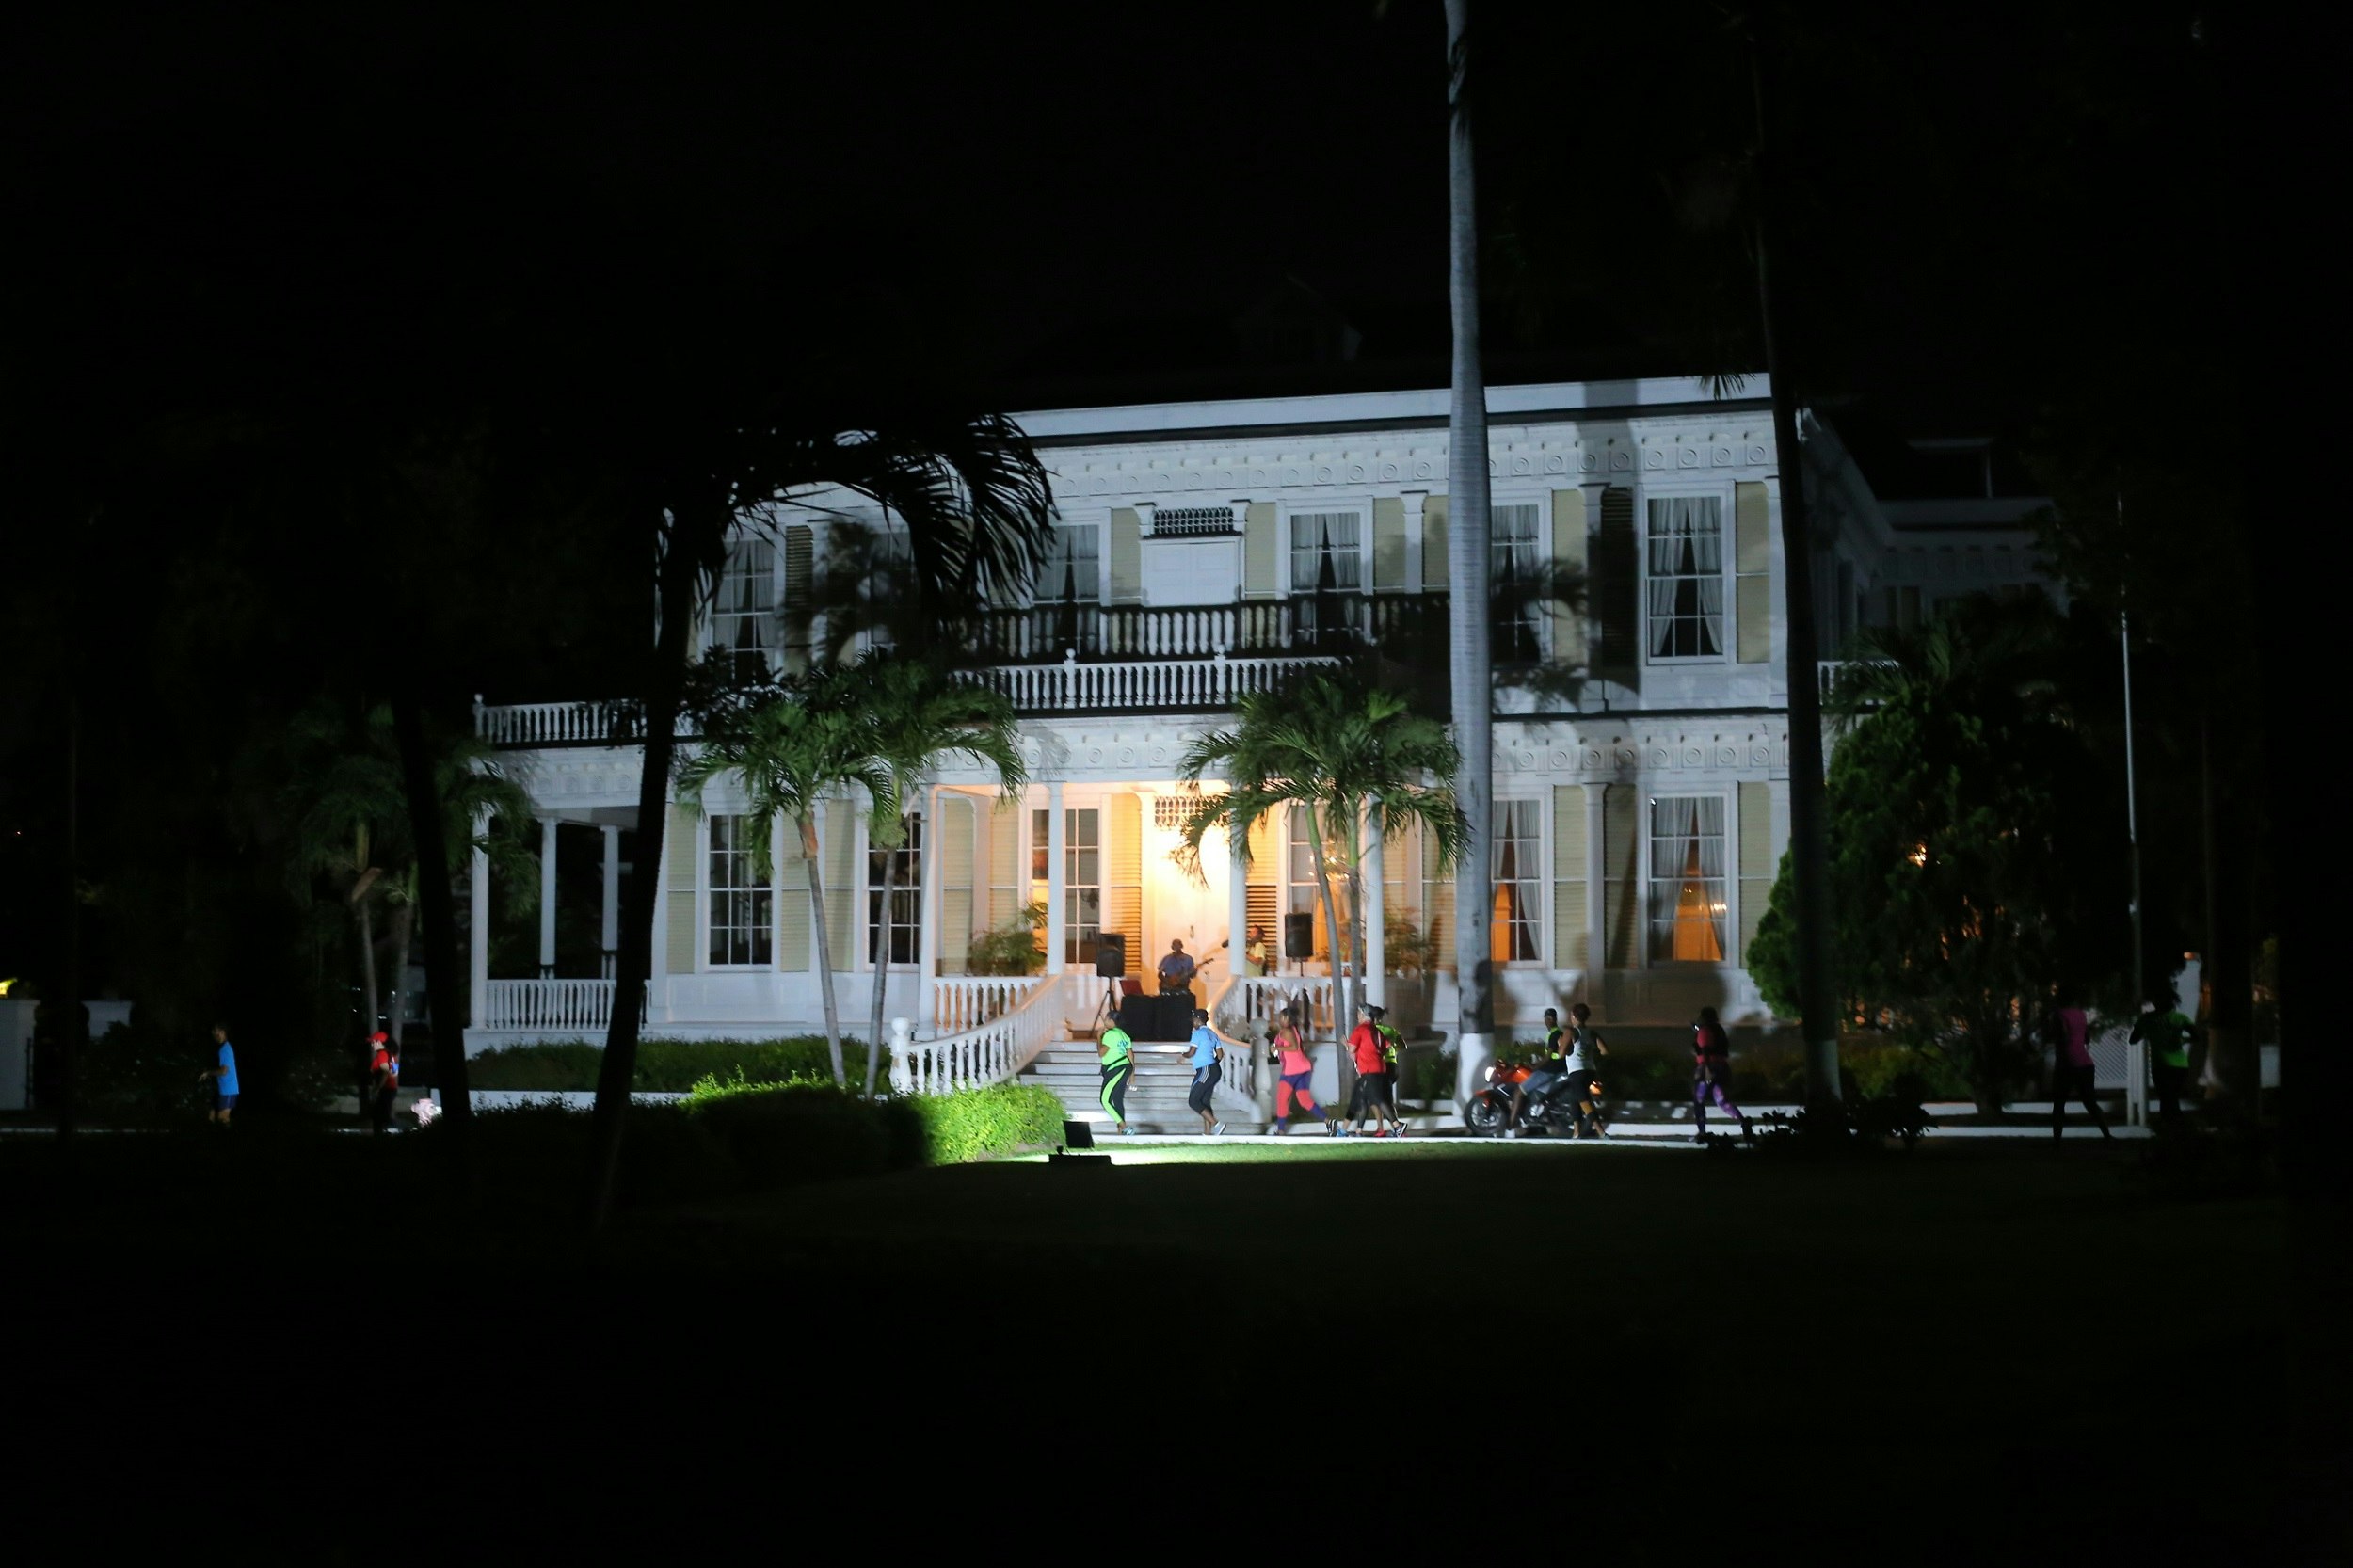 Runners make their way in front of a historic mansion; it's dark outside, but the house is floodlit, and there is a musician playing on the verandah.